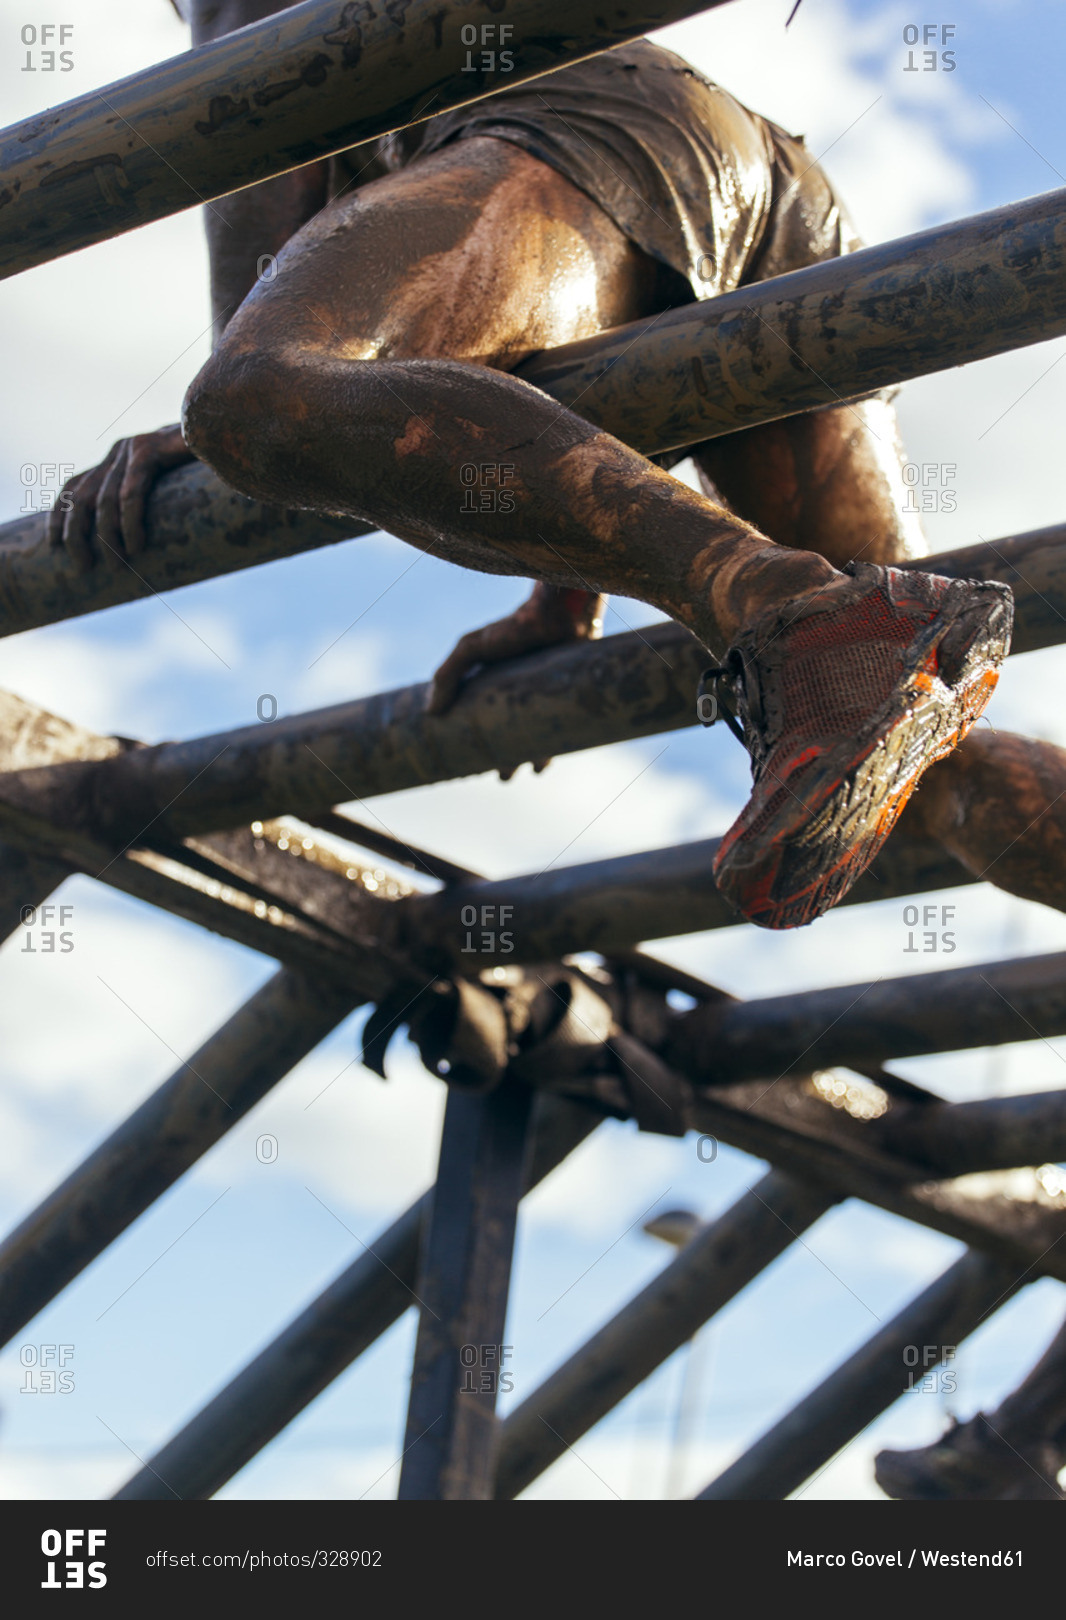 Participants in extreme obstacle race climbing on monkey bars